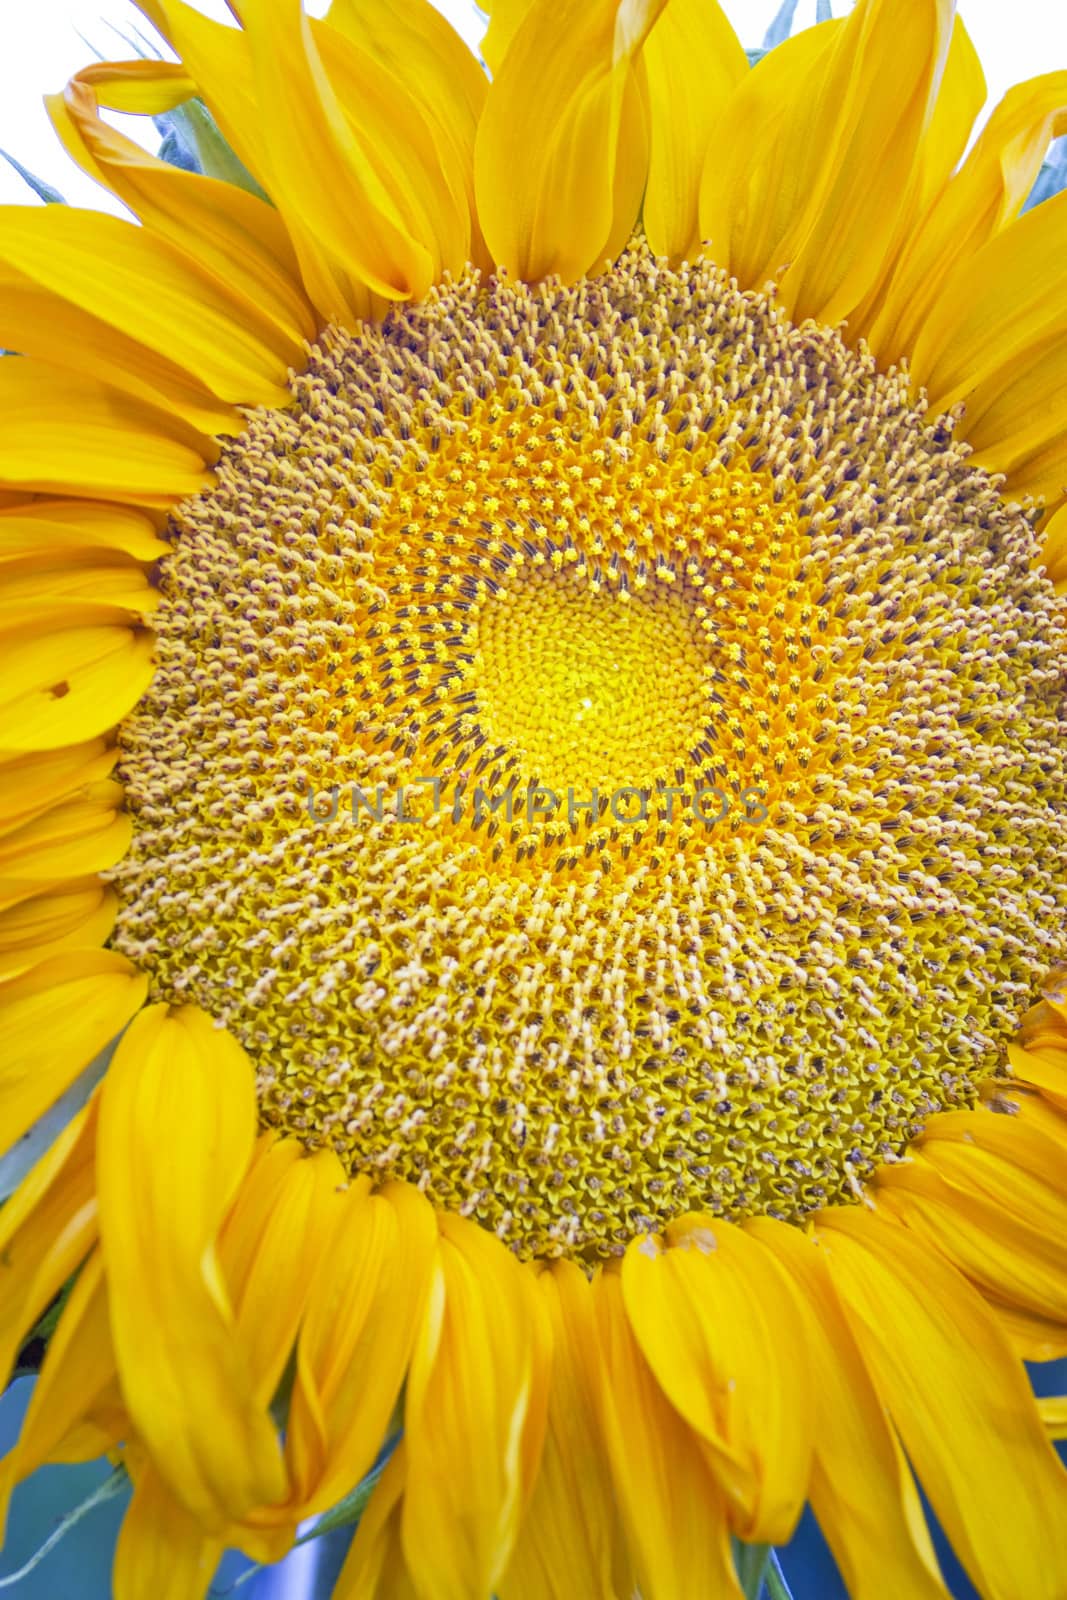 Stamens in the form of heart on a sunflower